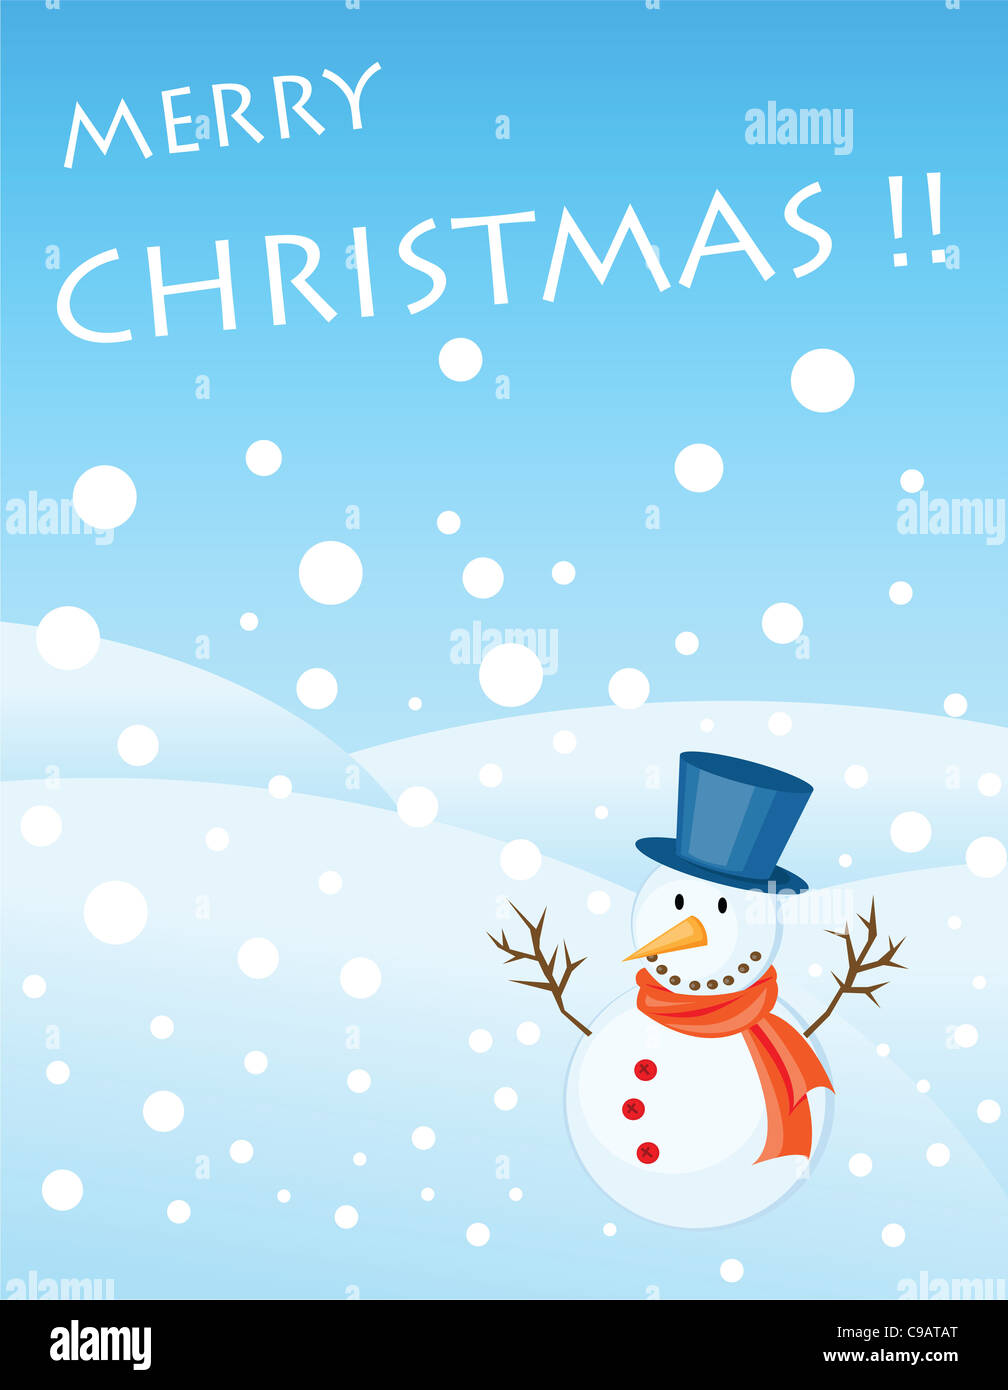 snowman illustrations for christmas greetings card. Stock Photo